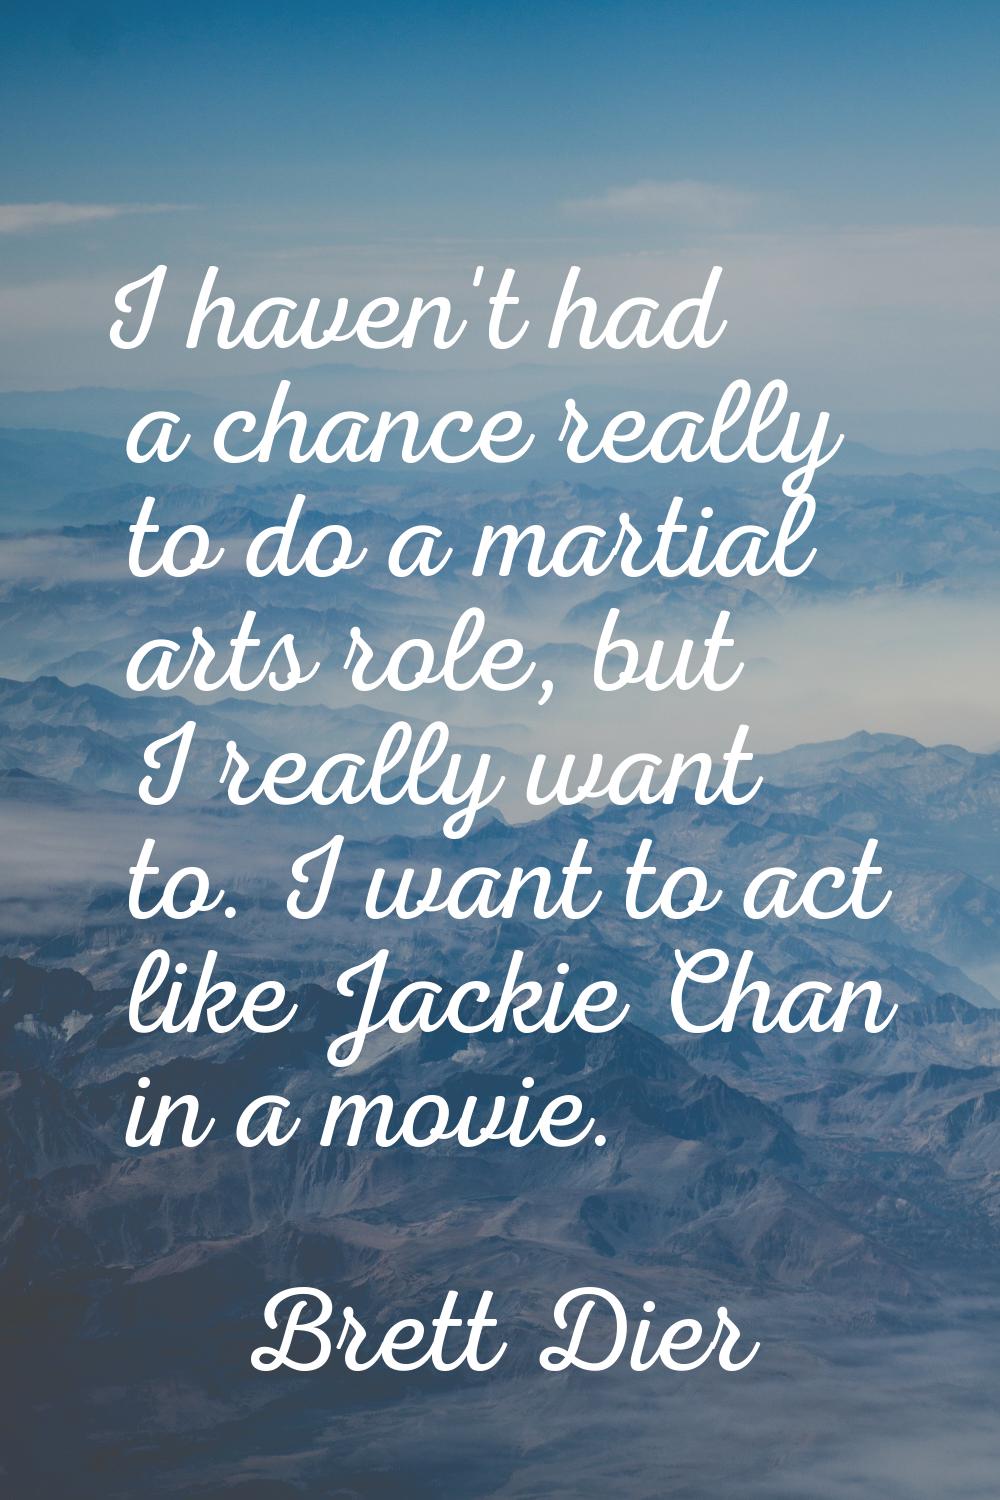 I haven't had a chance really to do a martial arts role, but I really want to. I want to act like J